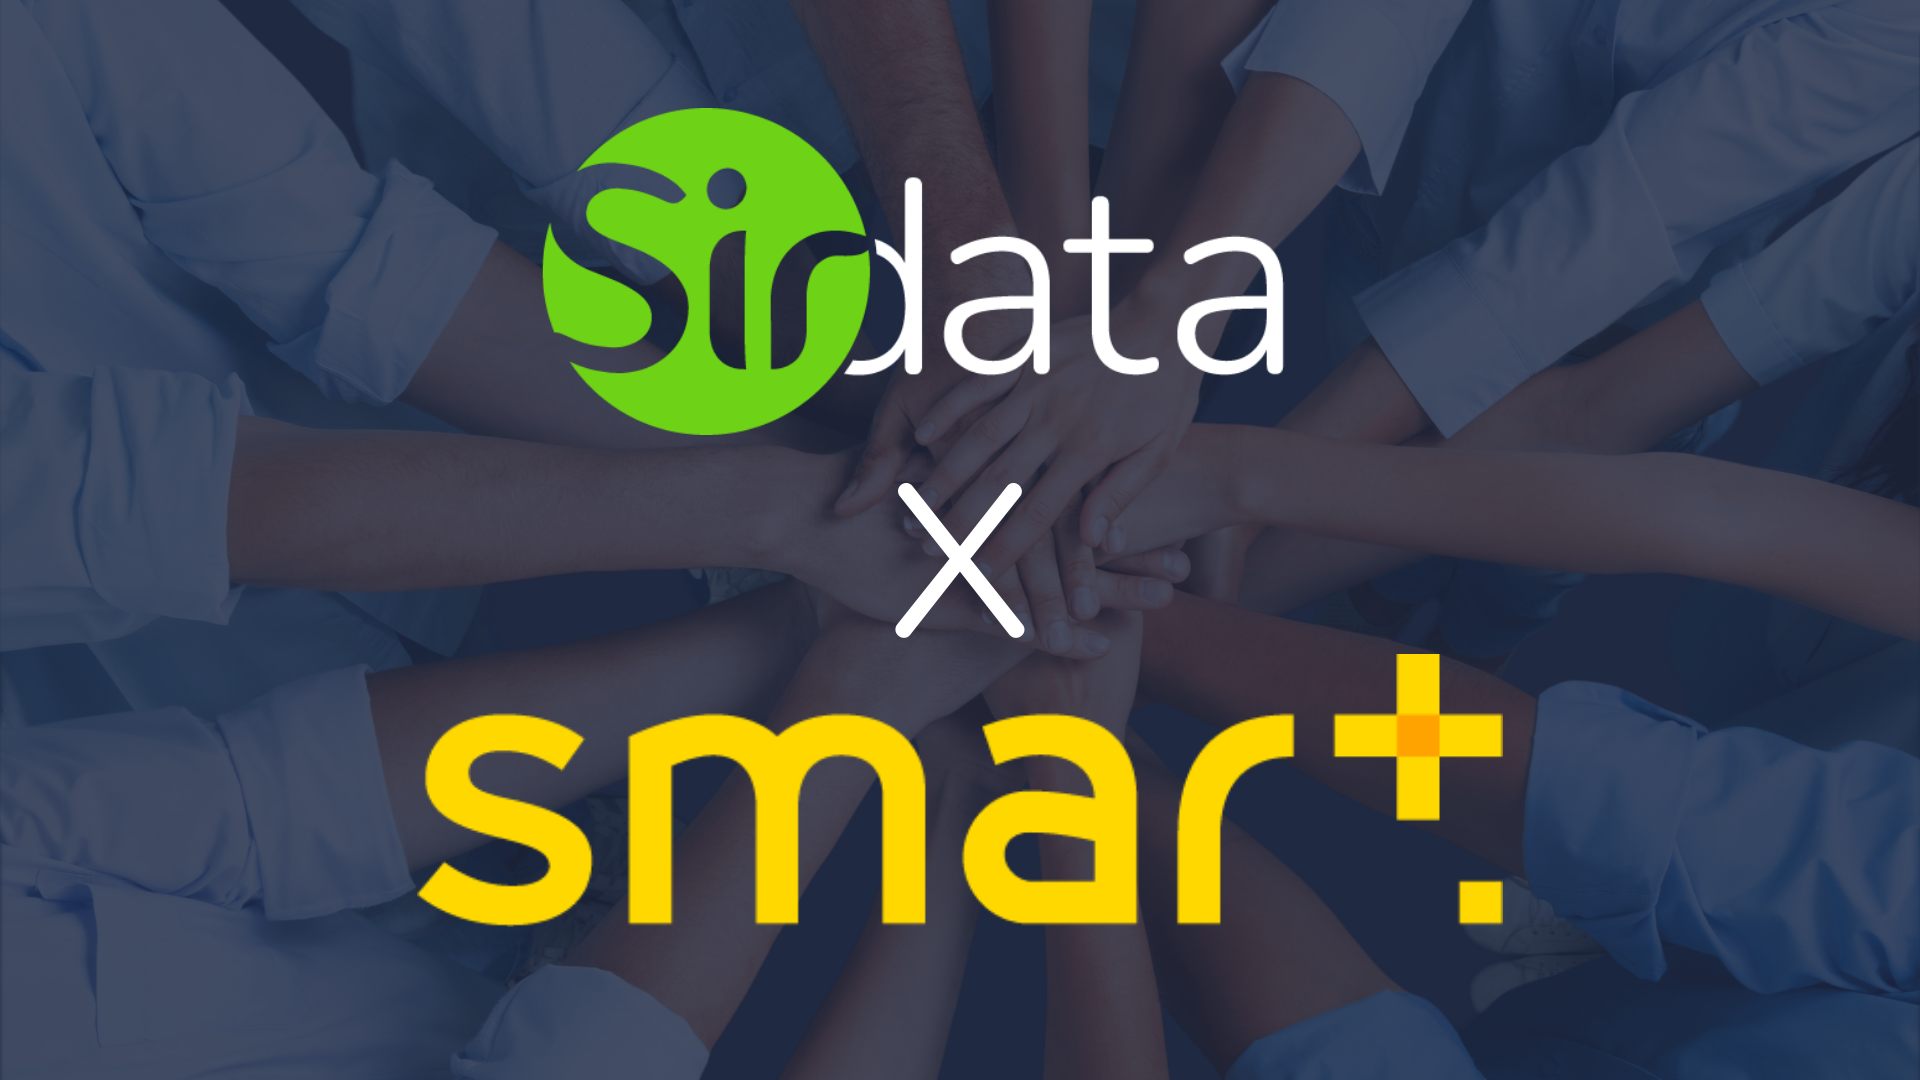 Combining scalable targeting capabilities and access to Top-Tier Media, Sirdata and Smart innovate to serve publisher and buyer requests.